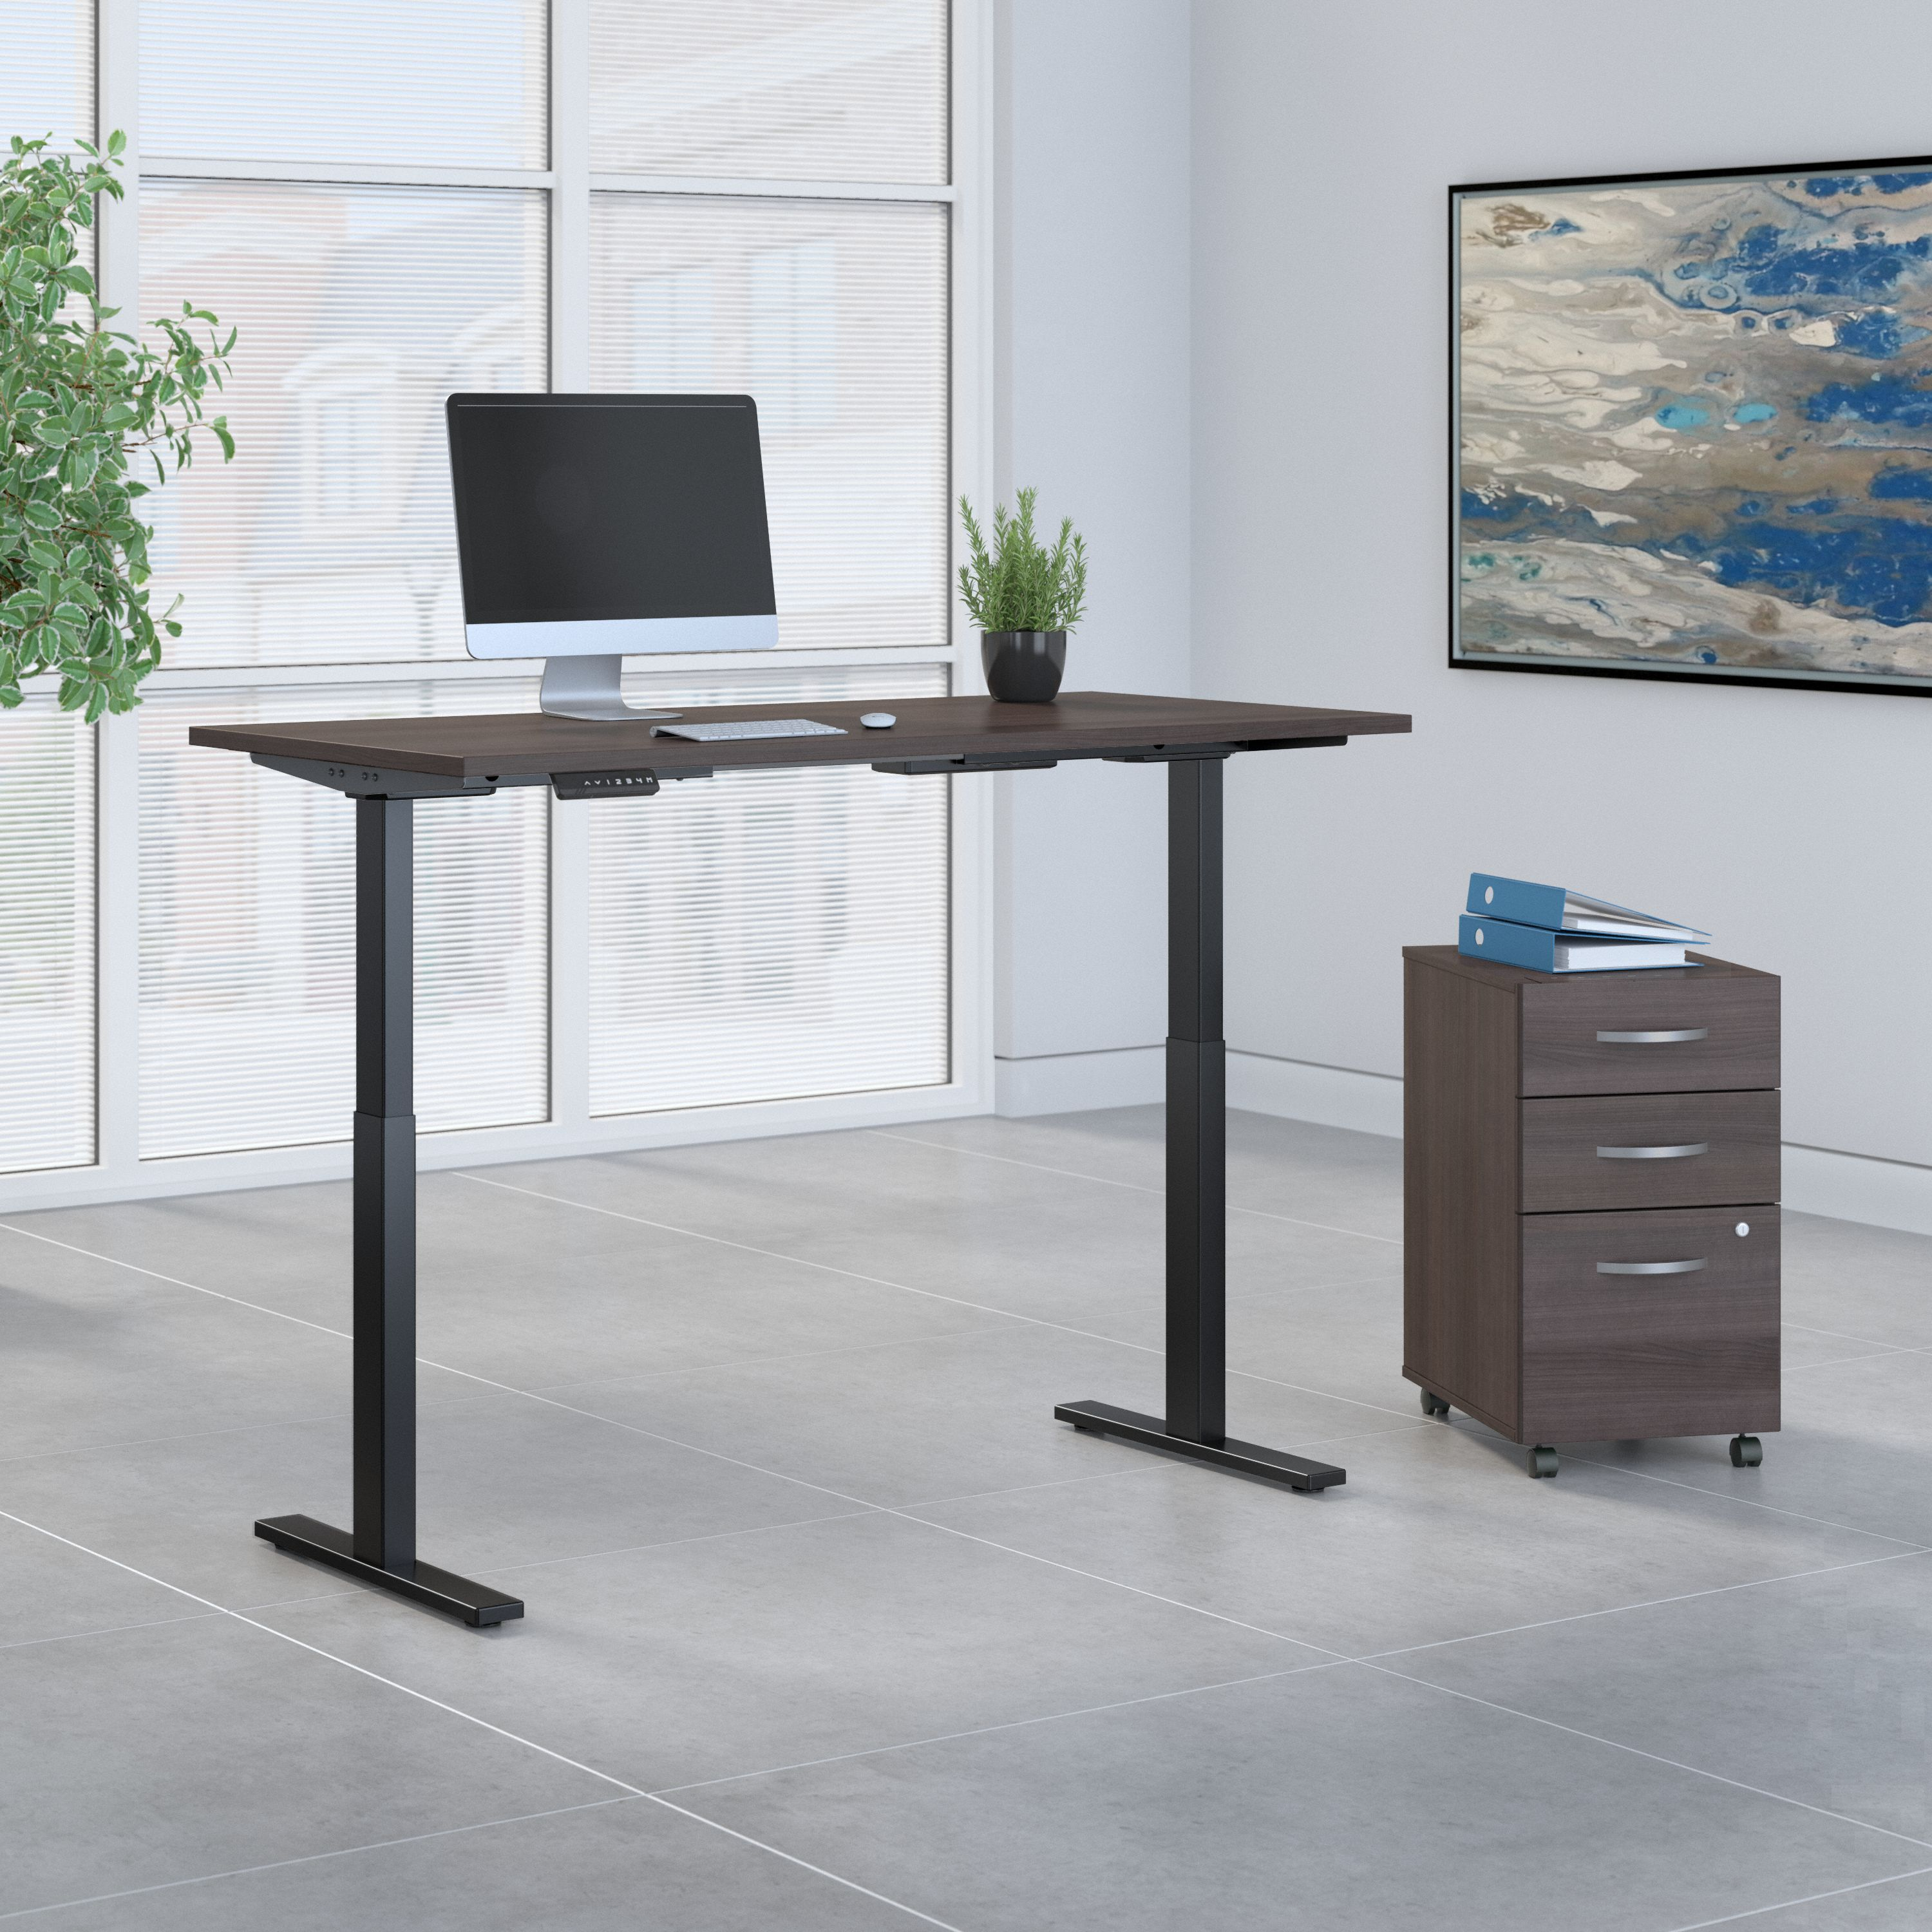 Shop Move 60 Series by Bush Business Furniture 60W x 30D Height Adjustable Standing Desk with Storage 01 M6S005SGSU #color_storm gray/black powder coat